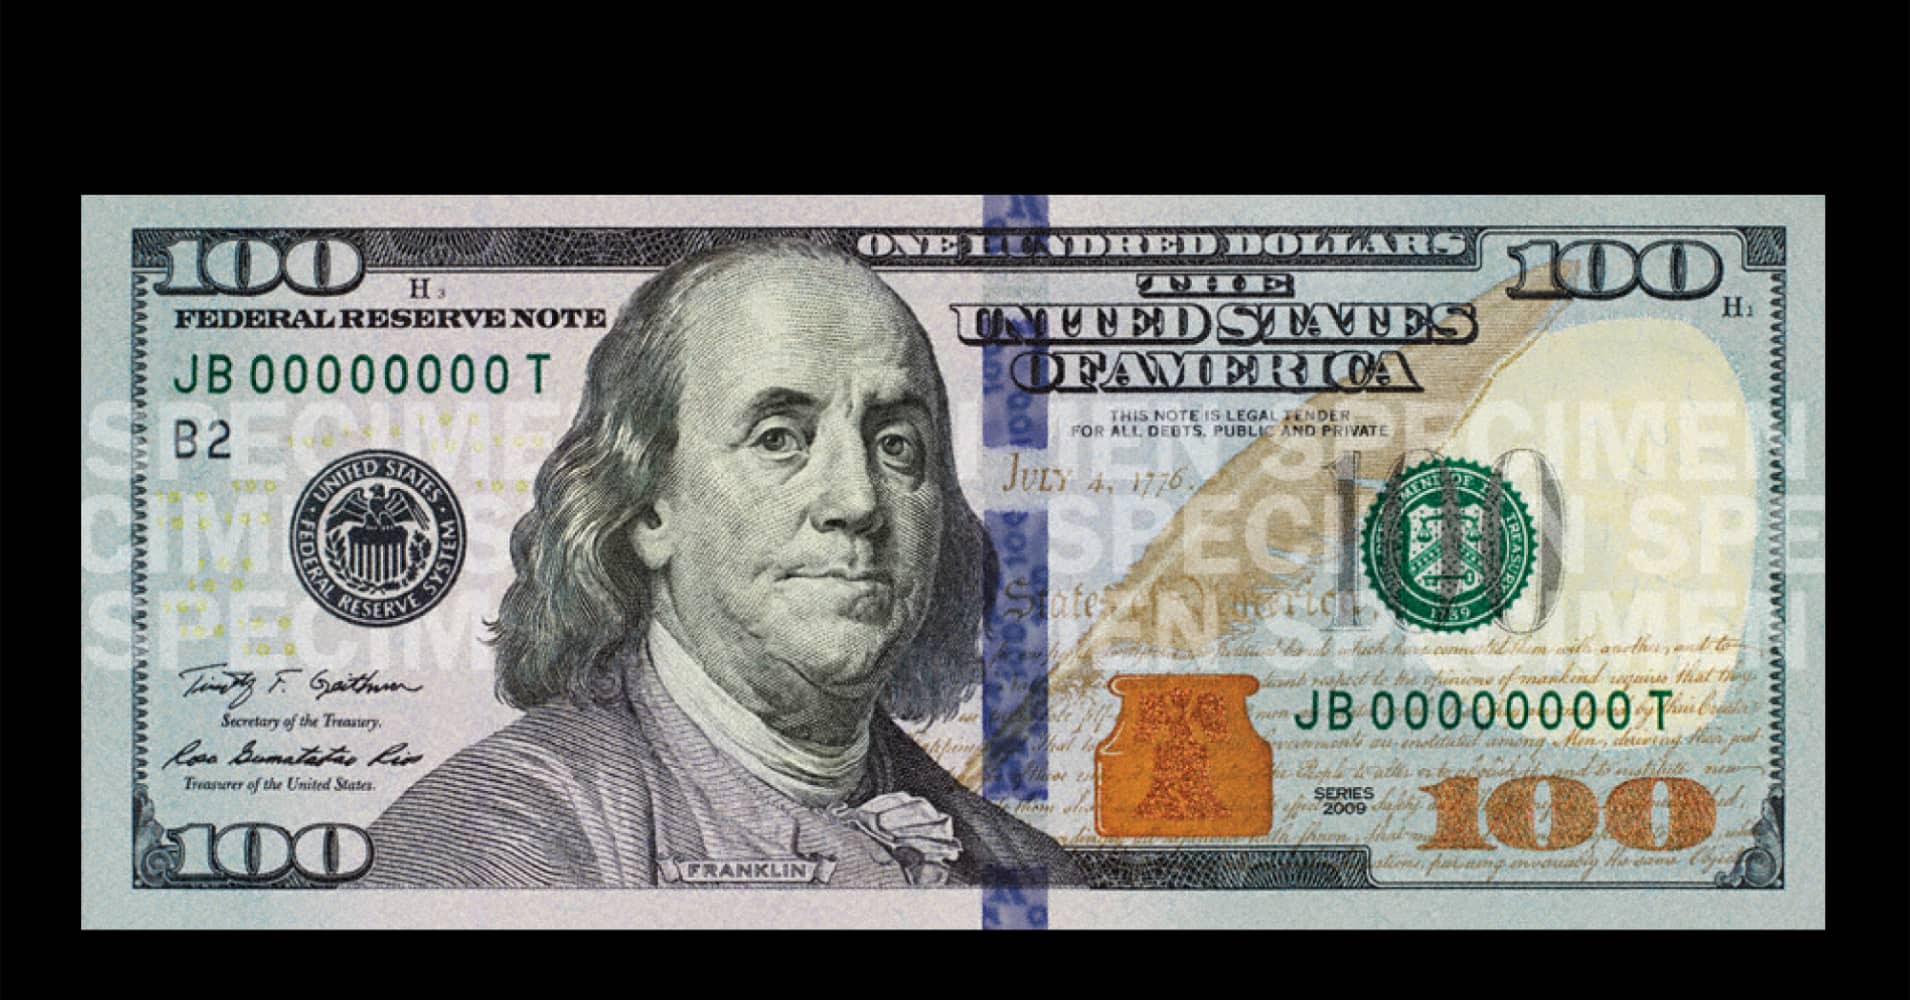 New $100 Bills Coming to an ATM Near You This October